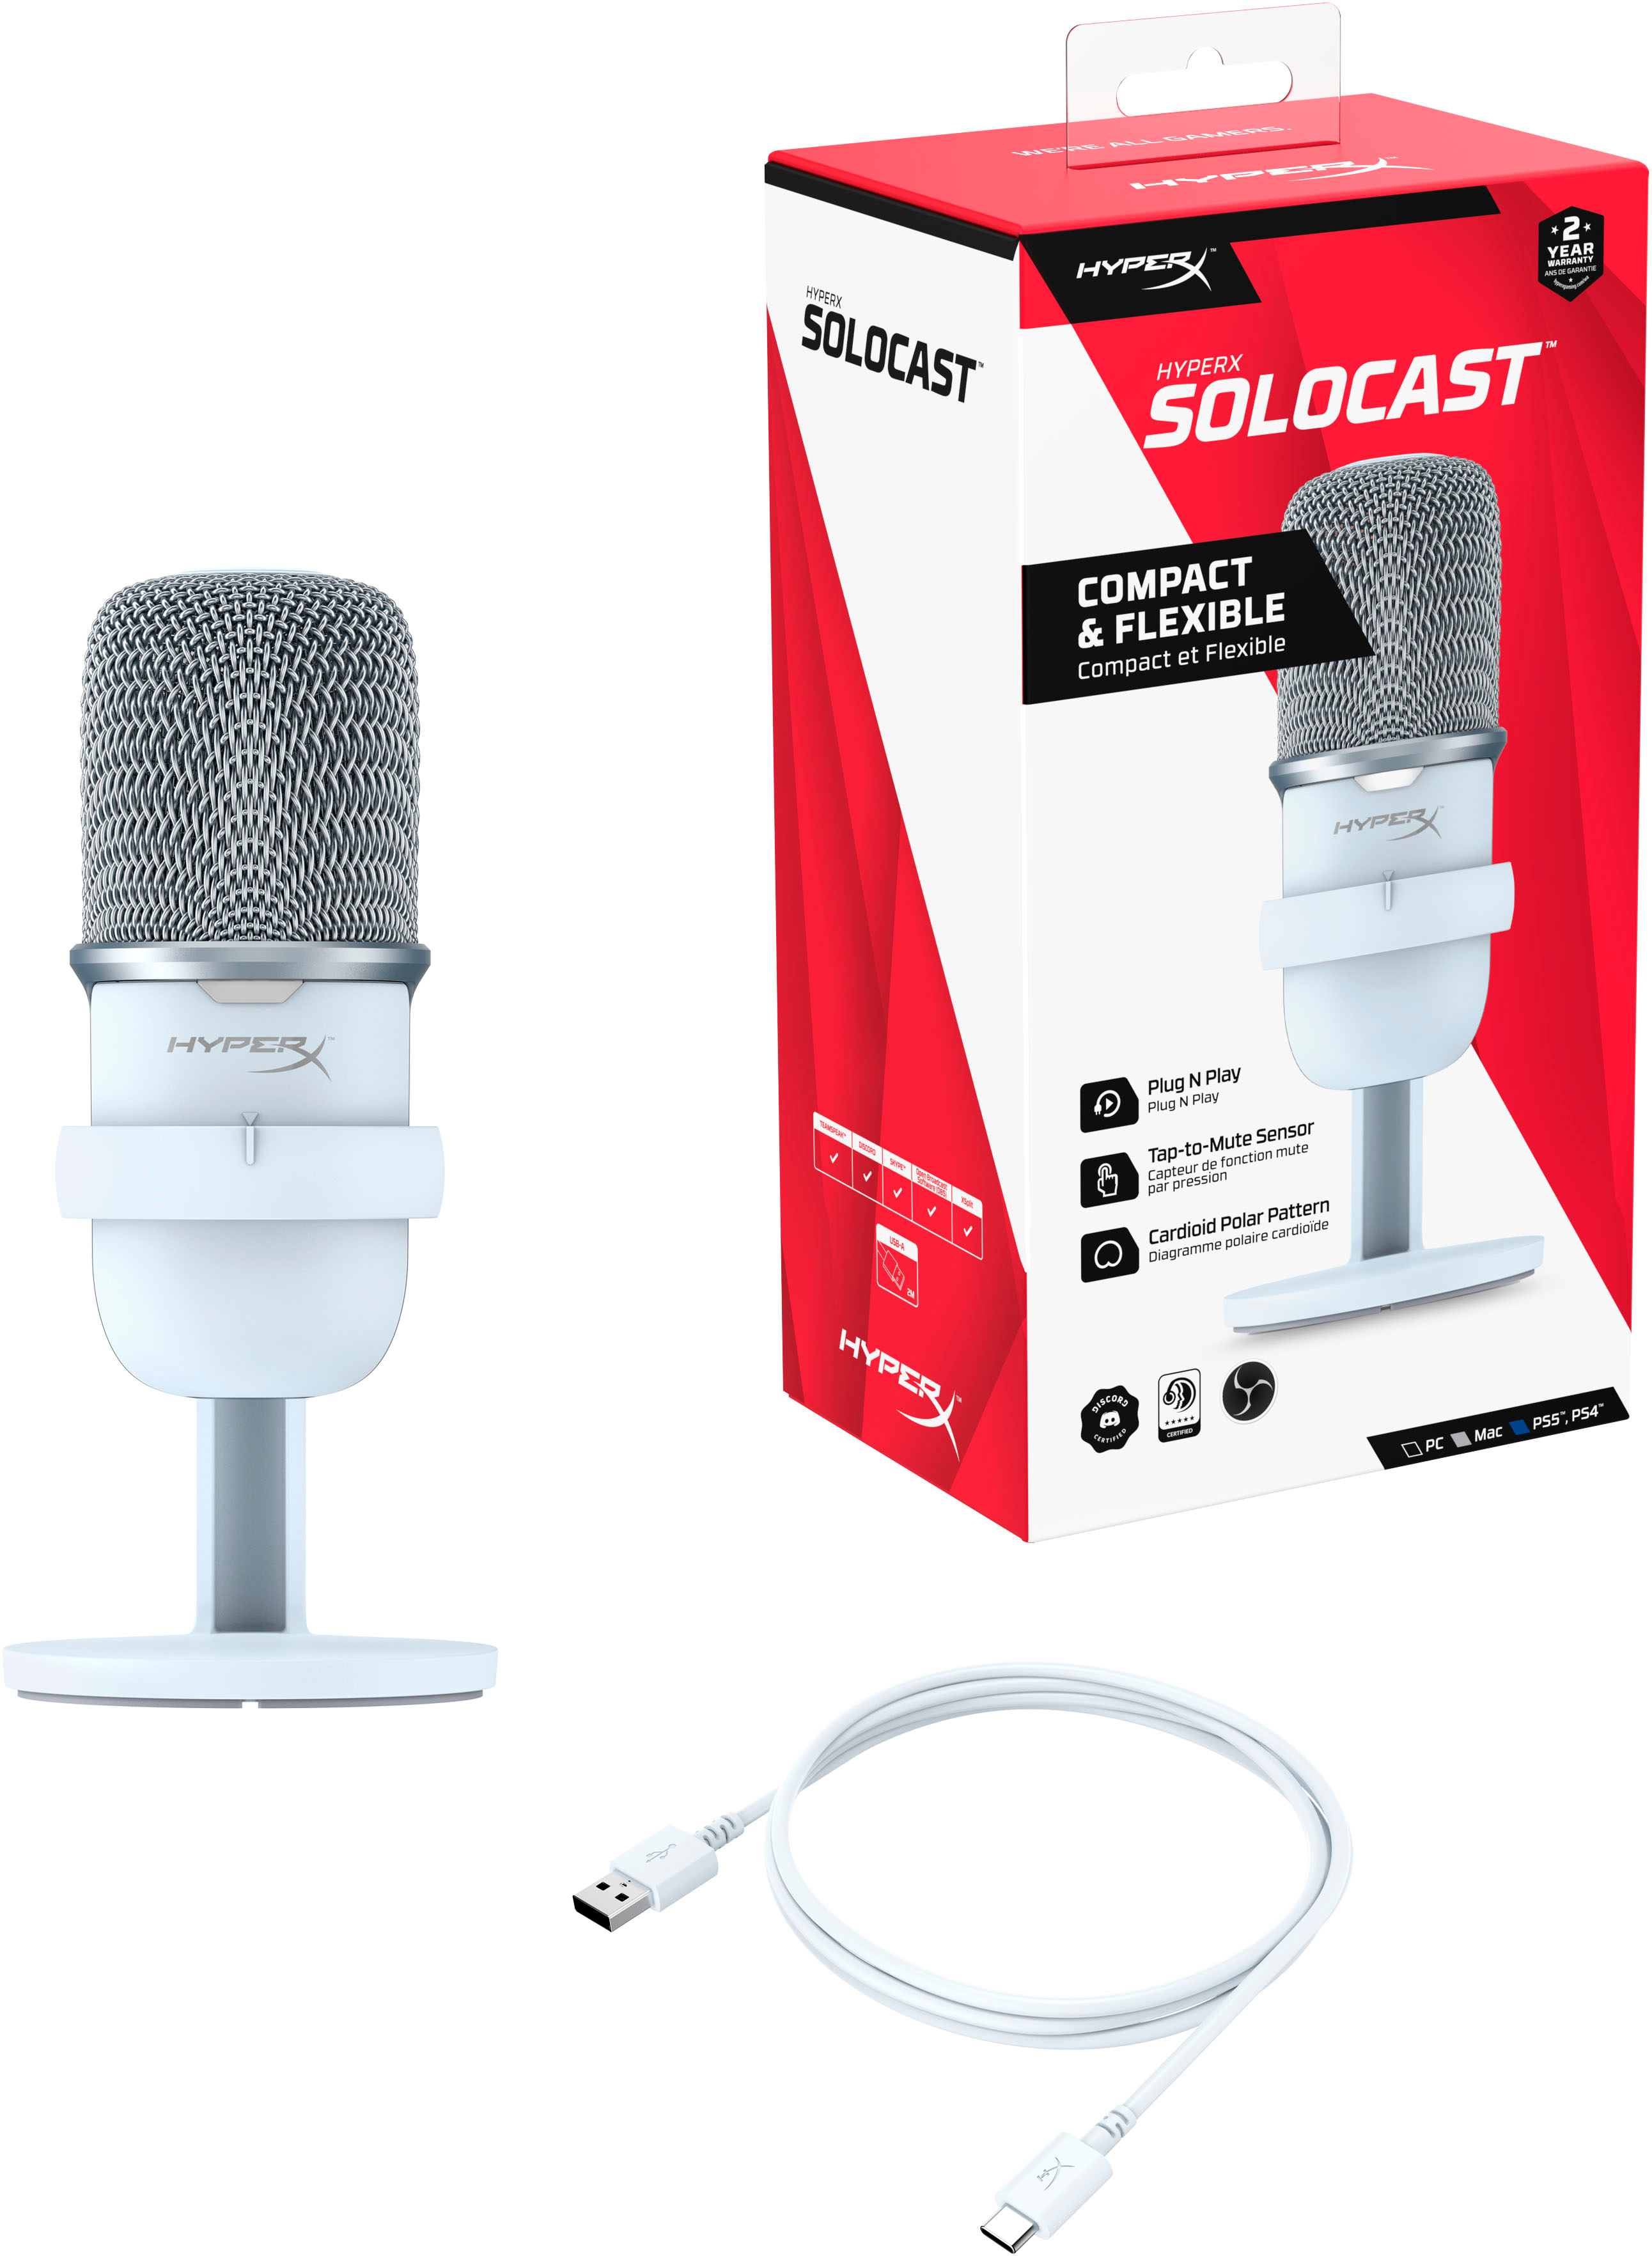 HyperX SoloCast review: A small and simple but mighty USB microphone